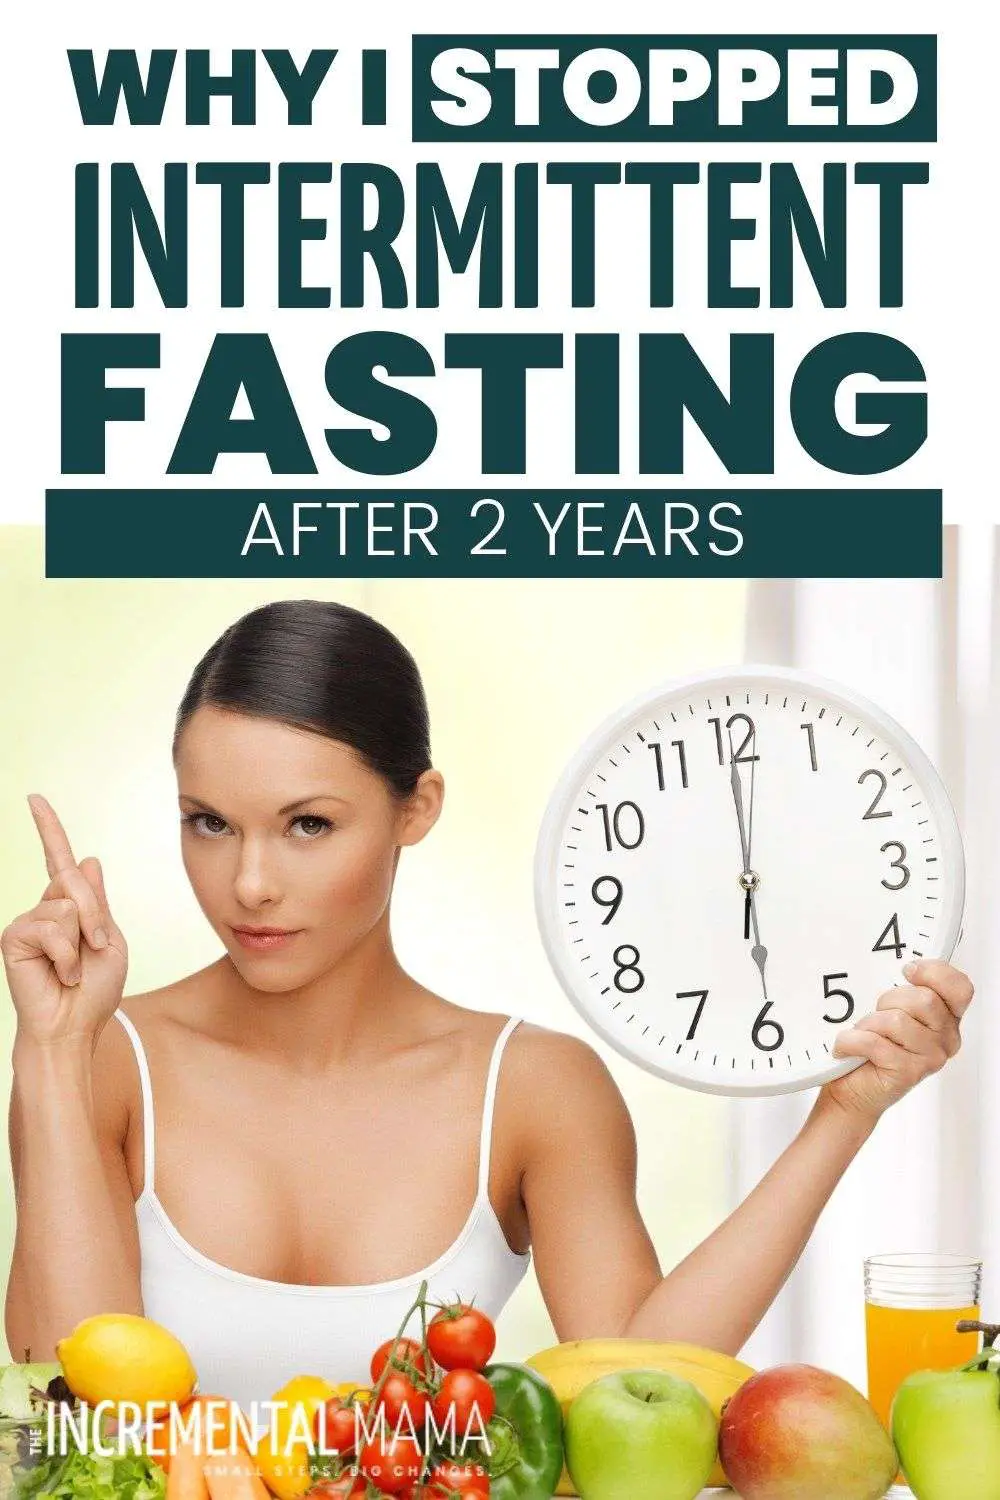 Why I Stopped Intermittent Fasting After 2 Years ...